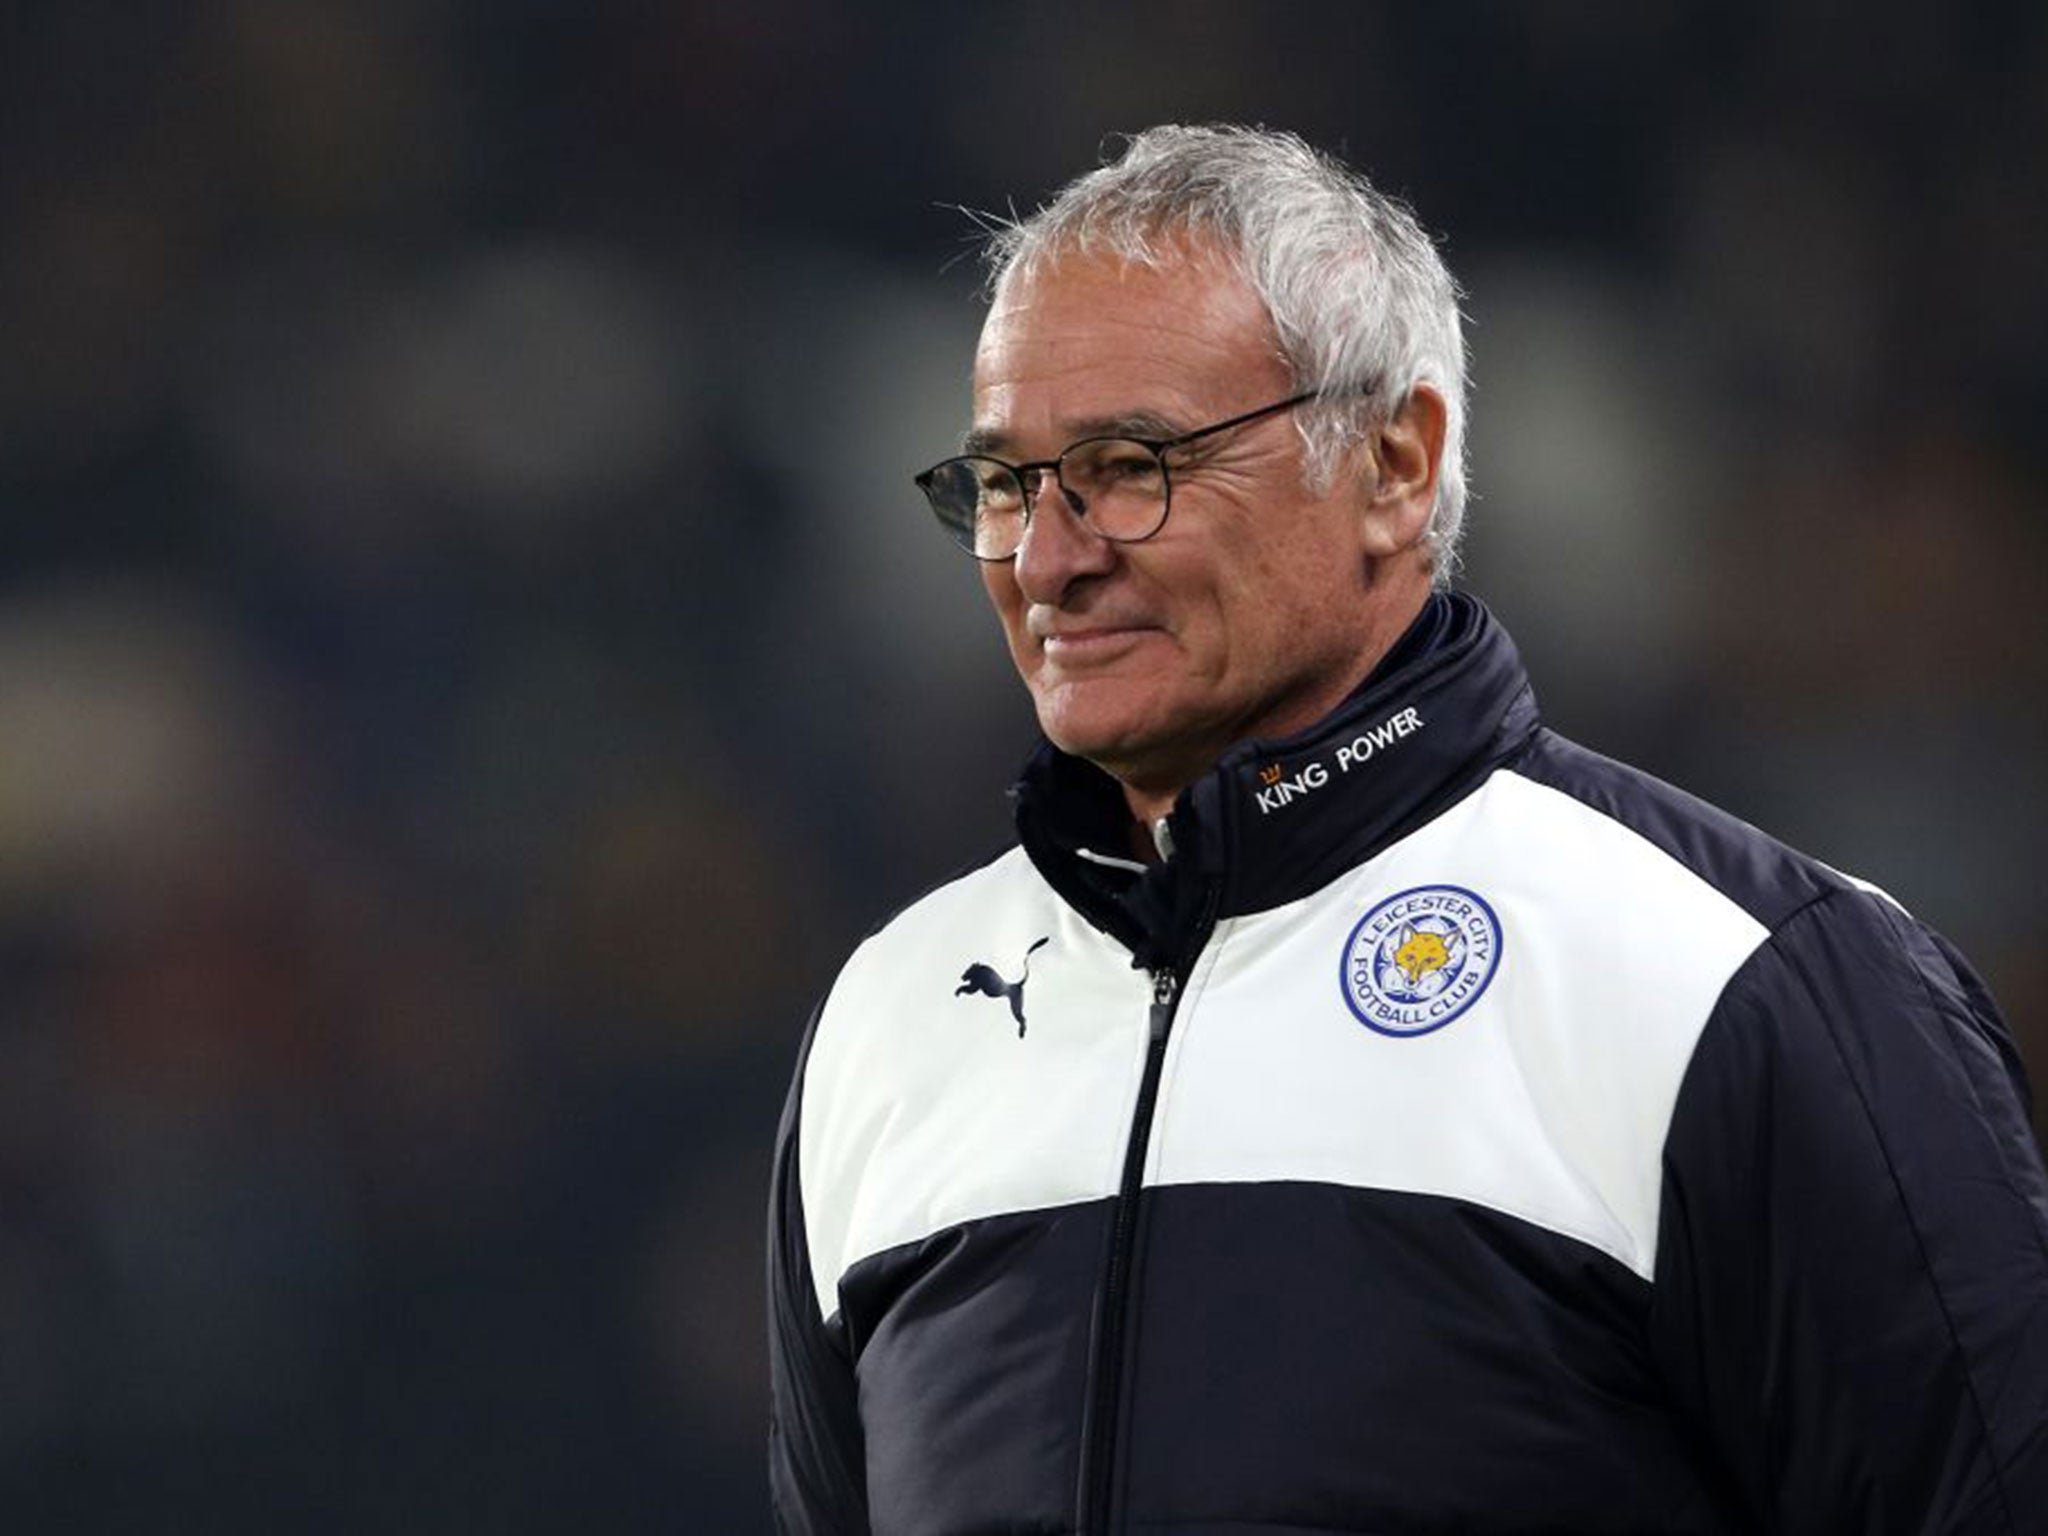 Claudio Ranieri is all smiles at the moment